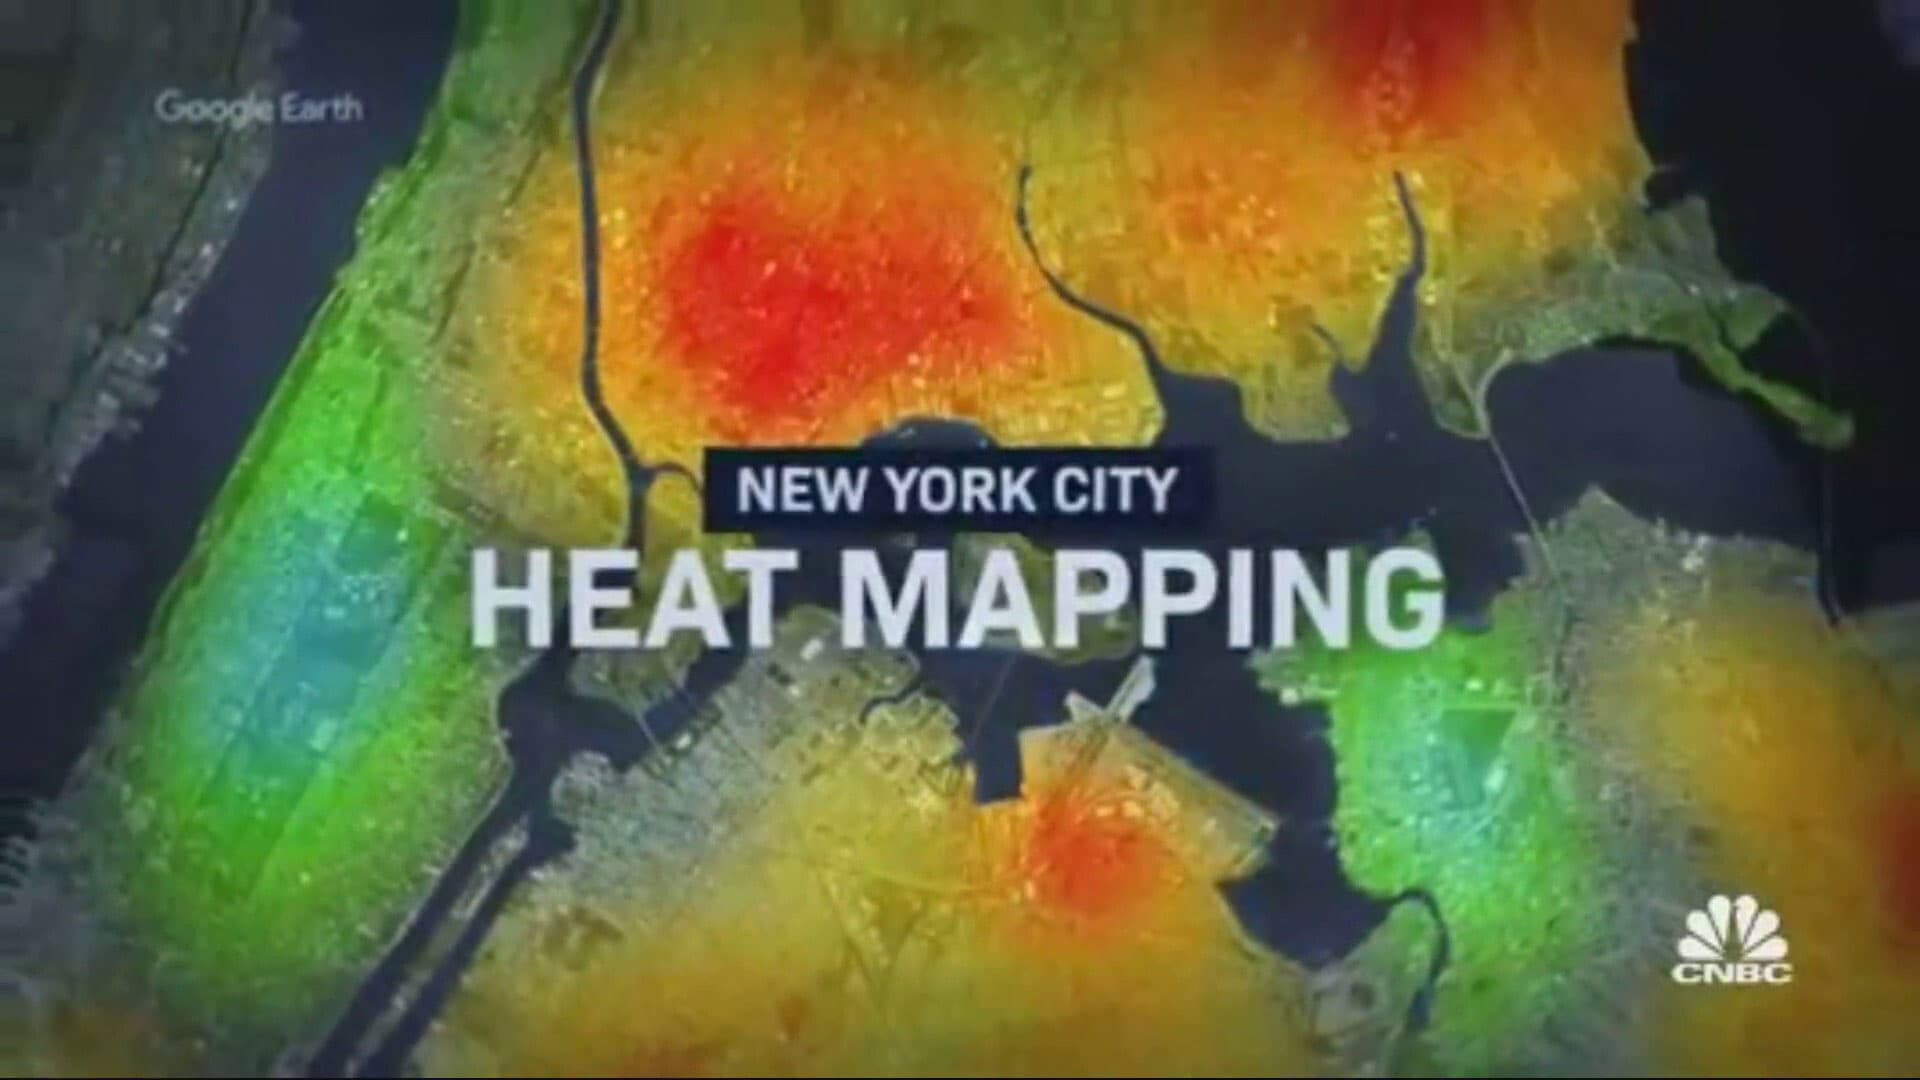 Urban heat mapping project in NYC finds poor neighborhoods hotter